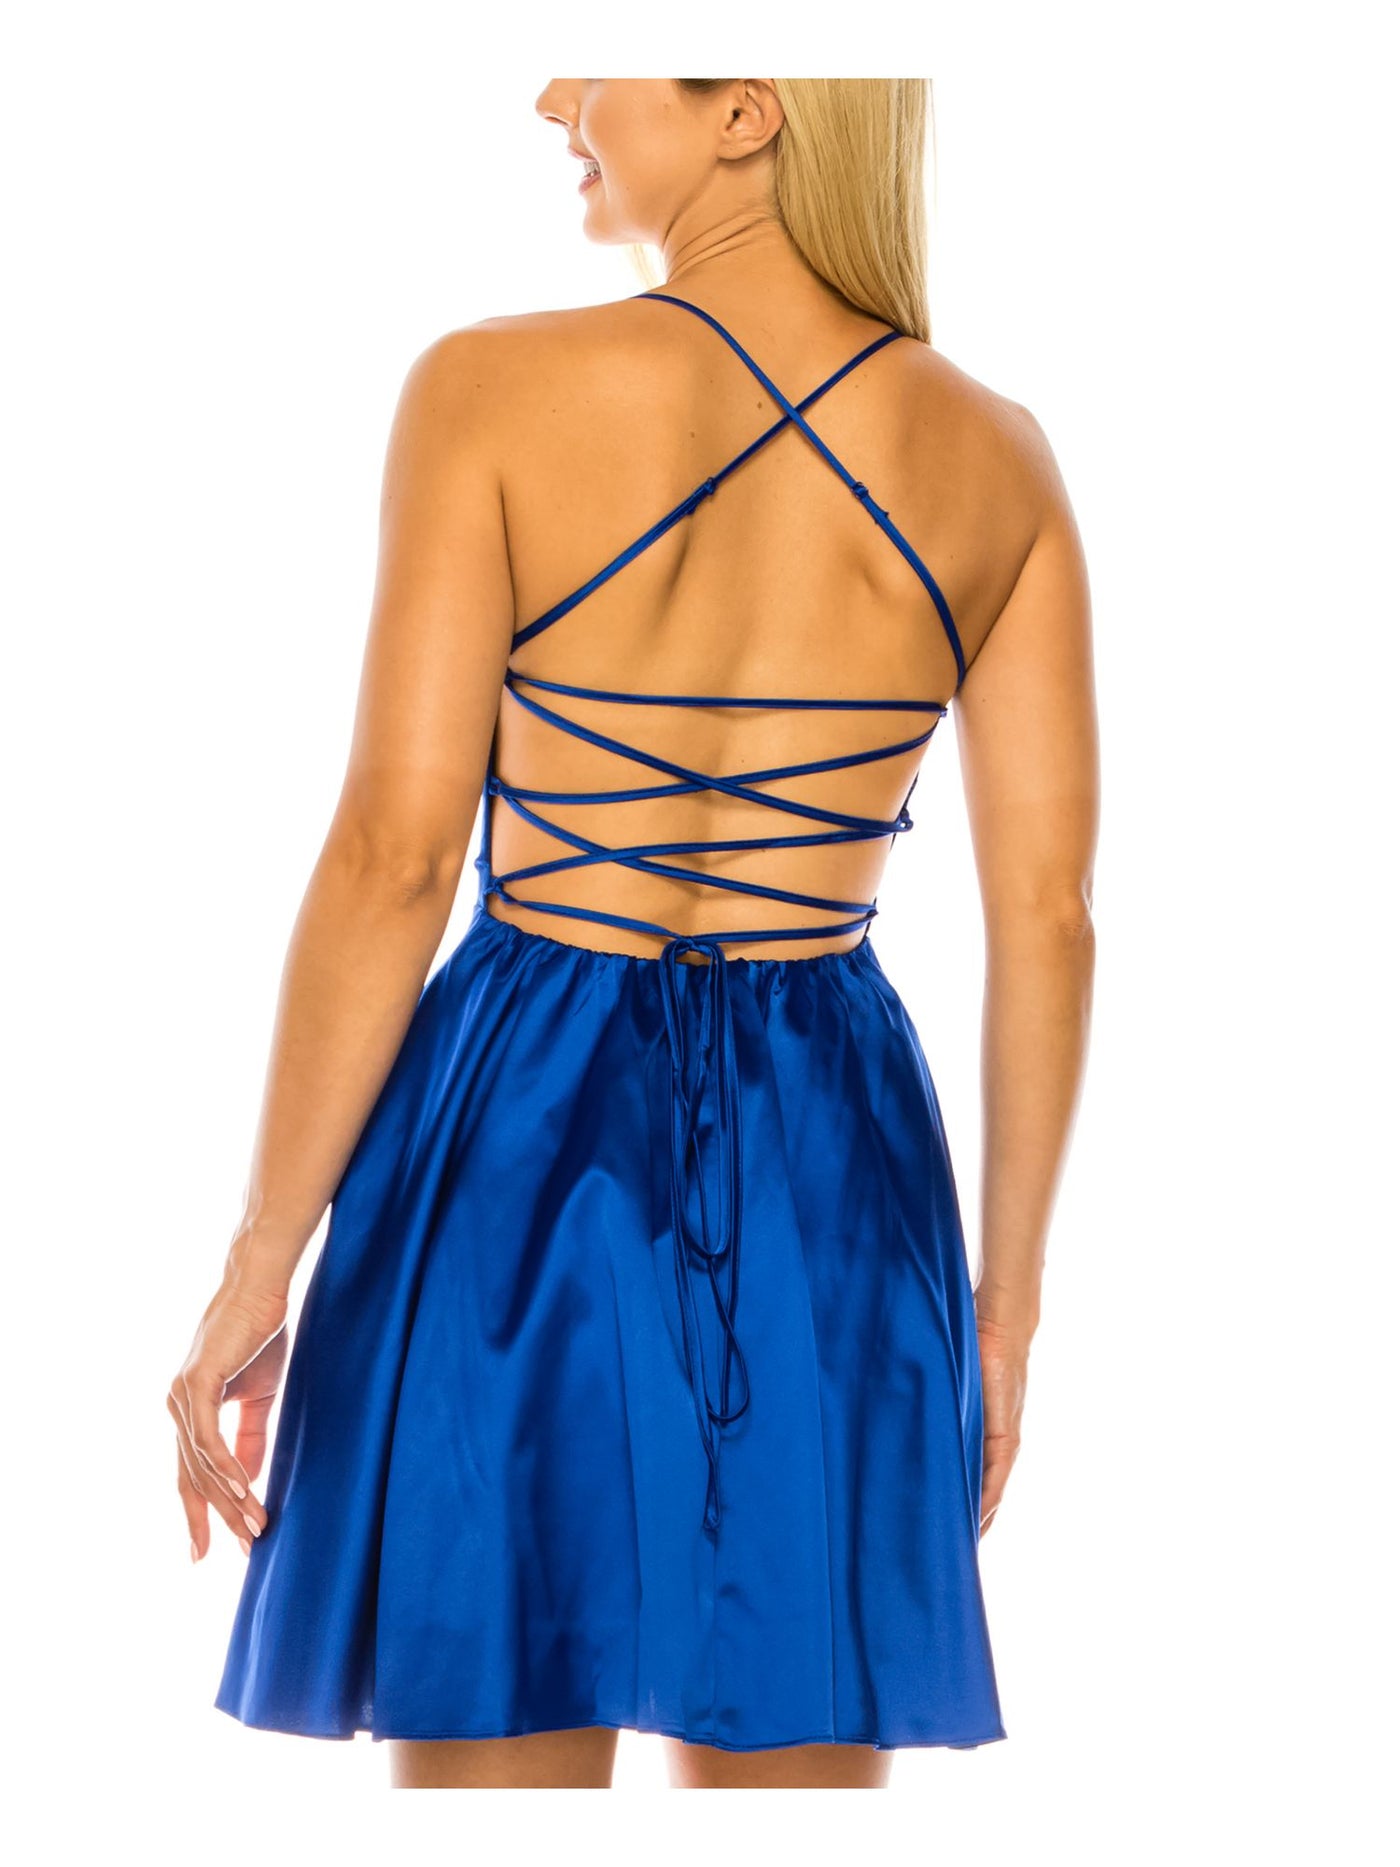 B DARLIN Womens Blue Open Back Adjustable Lined Pocketed Spaghetti Strap Square Neck Short Party A-Line Dress Juniors 3\4